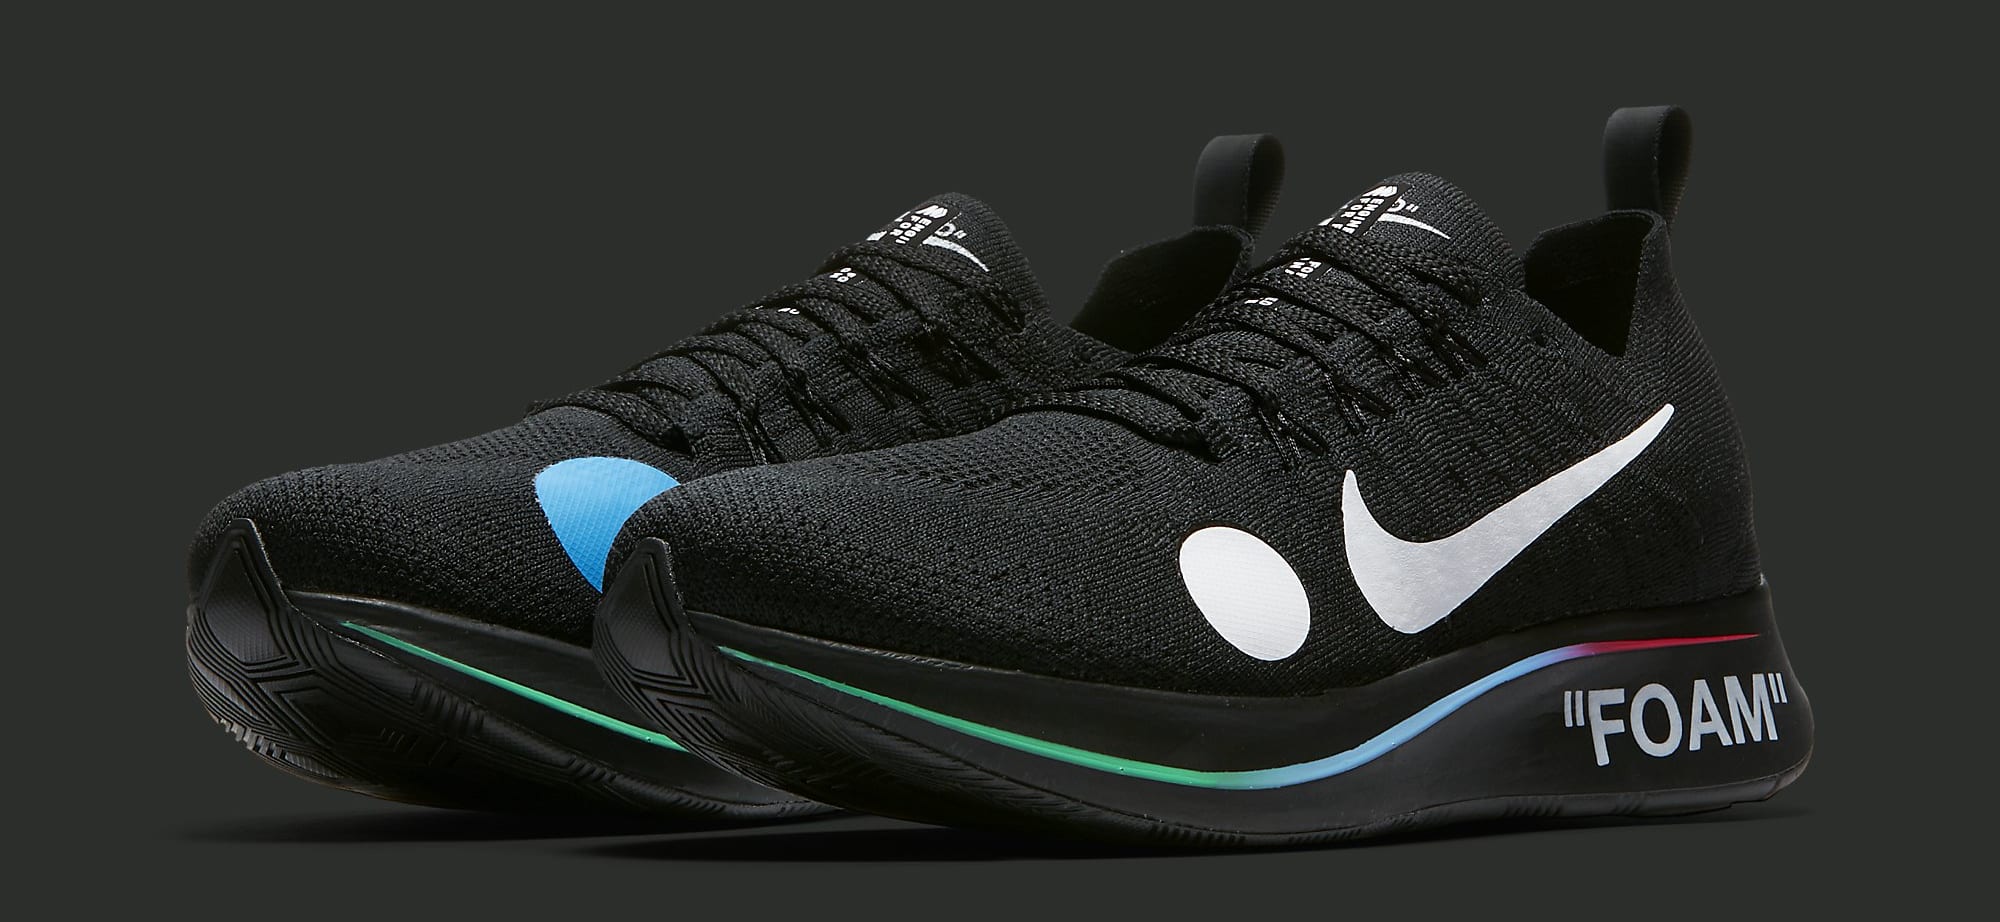 Off-White x Nike Zoom Fly Mercurial Flyknit &#x27;Black&#x27; AO2115-001 (Pair)